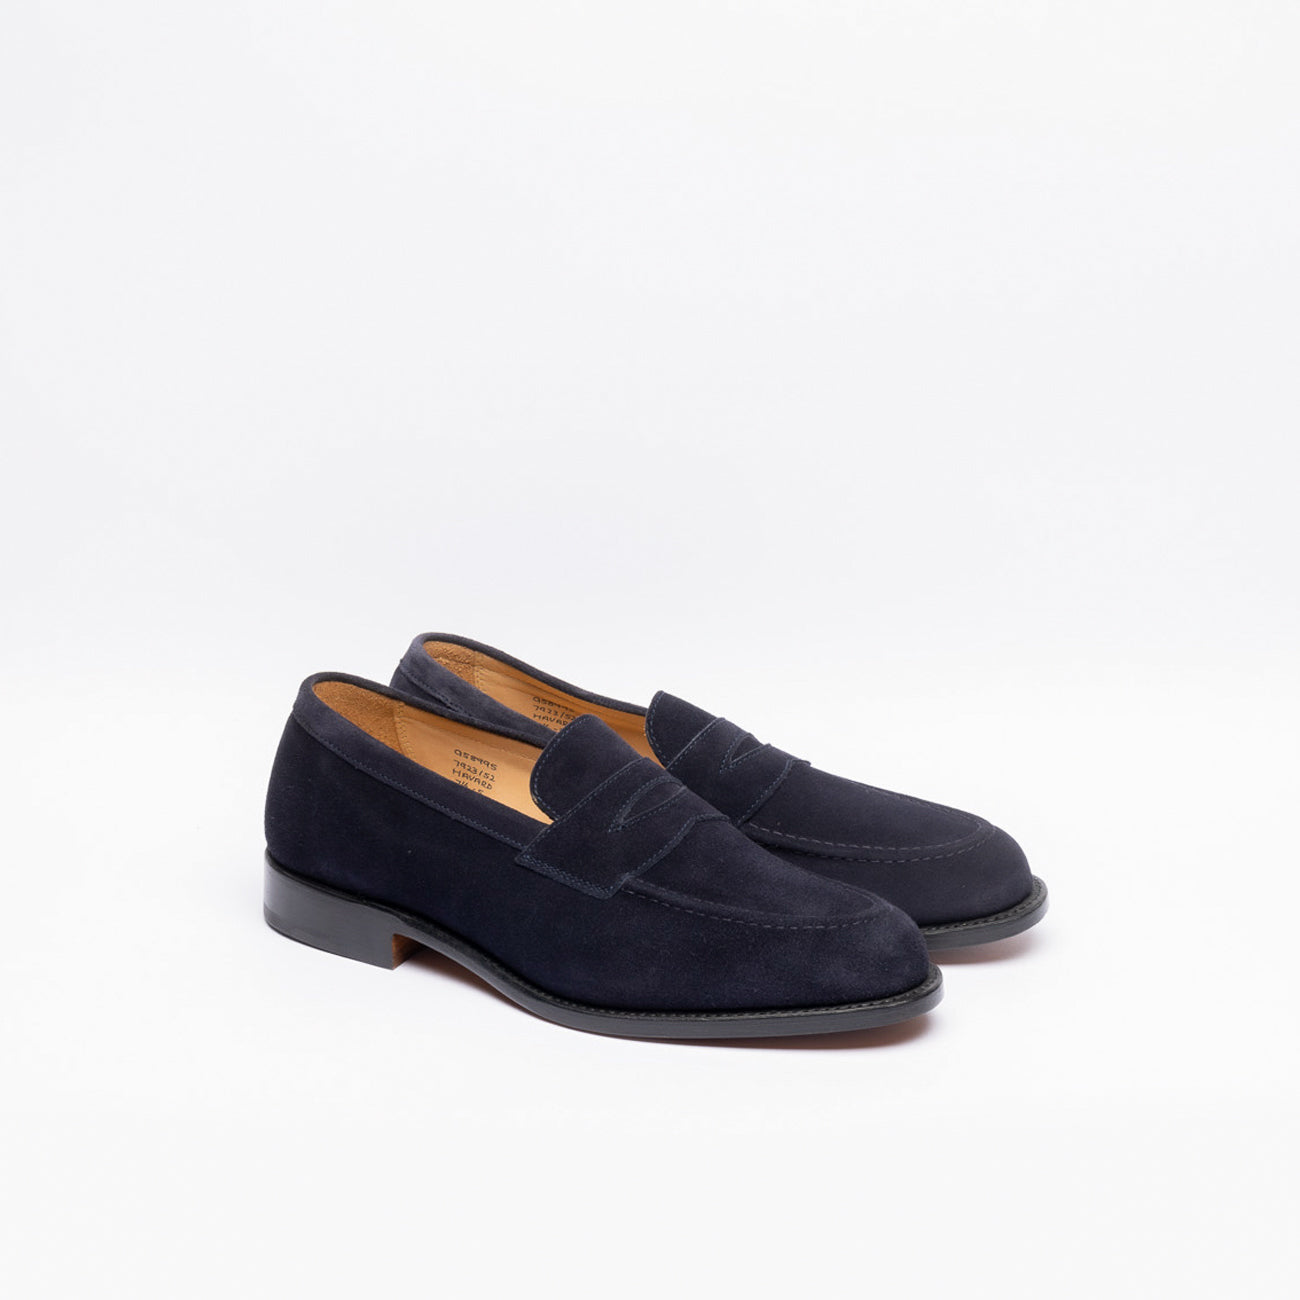 Tricker’s Havard penny loafer moccasin in blue suede